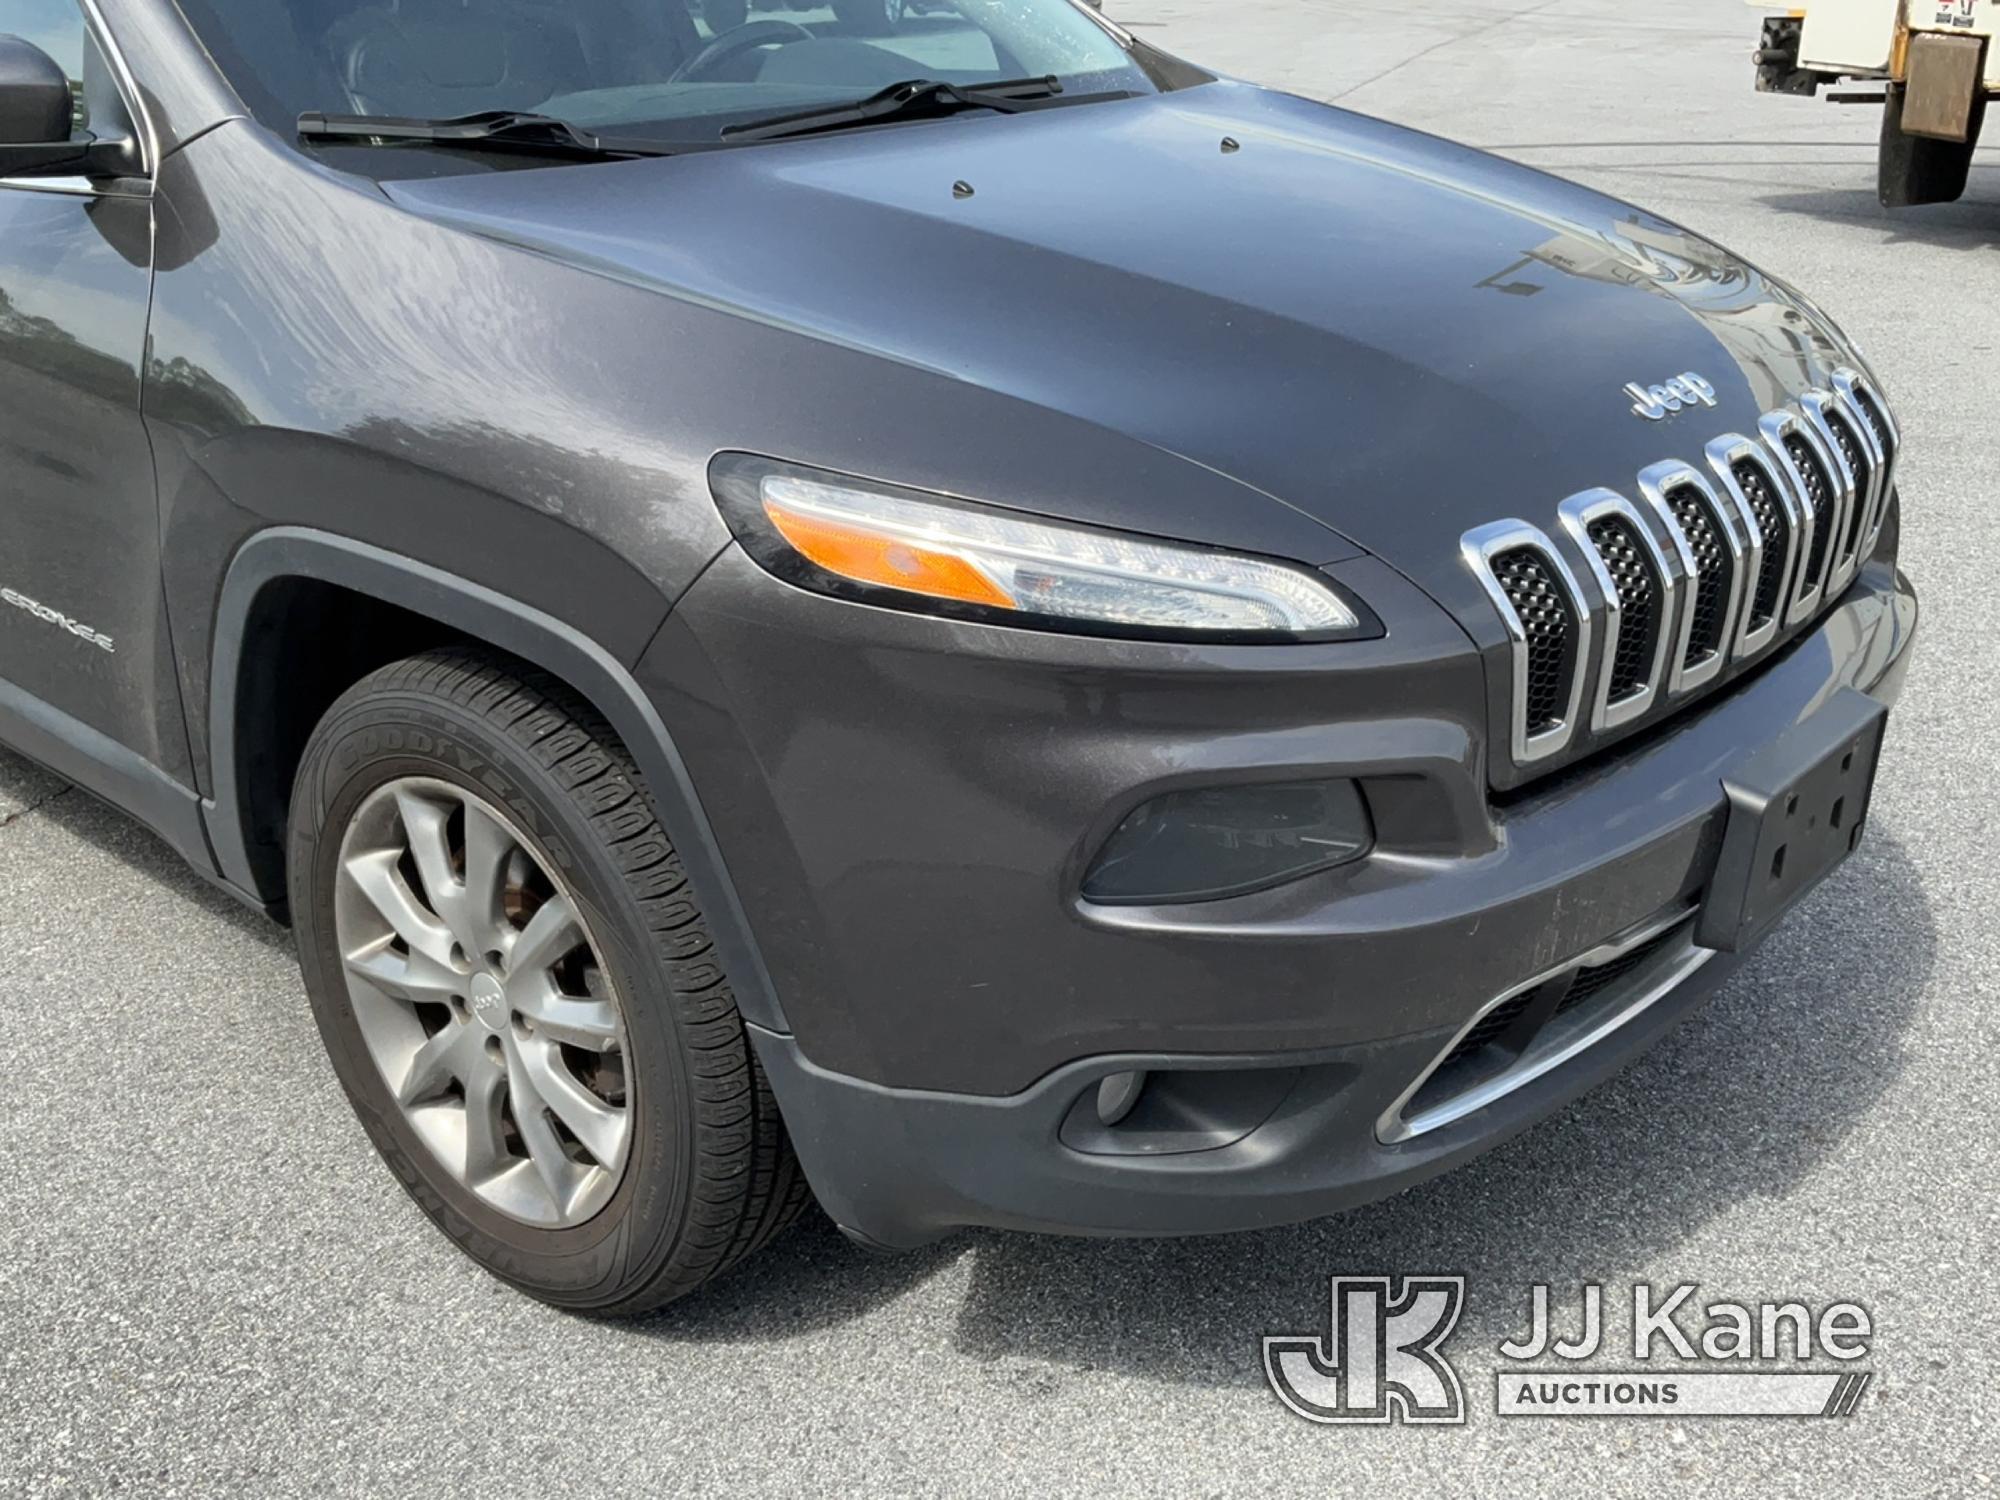 (Chester Springs, PA) 2018 Jeep Cherokee 4x4 4-Door Sport Utility Vehicle Runs & Moves) (Body Damage